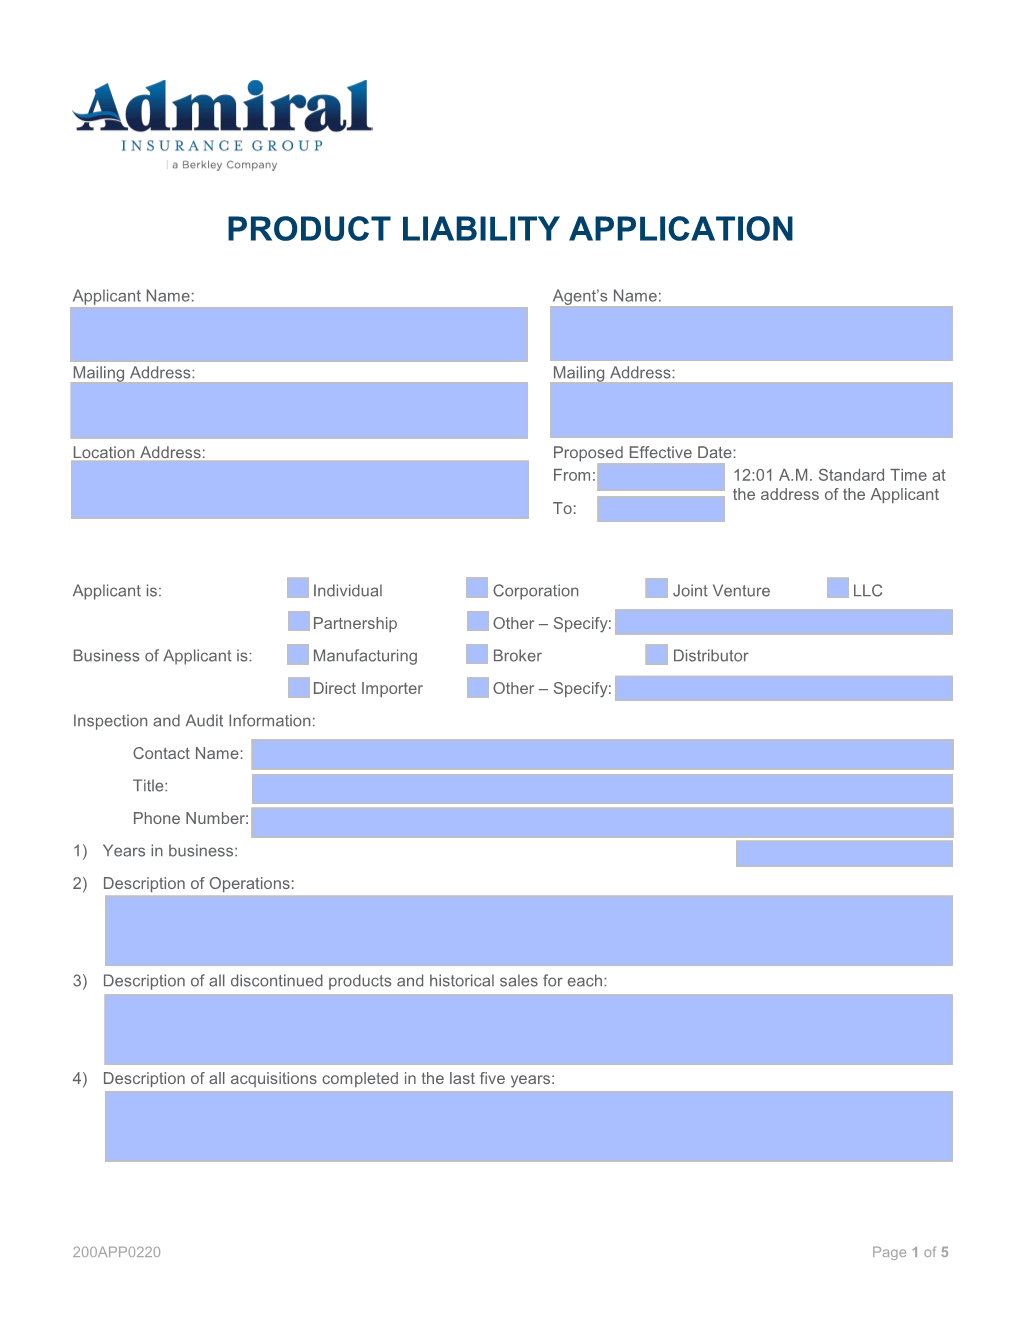 Product Liability Application [200APP0220]